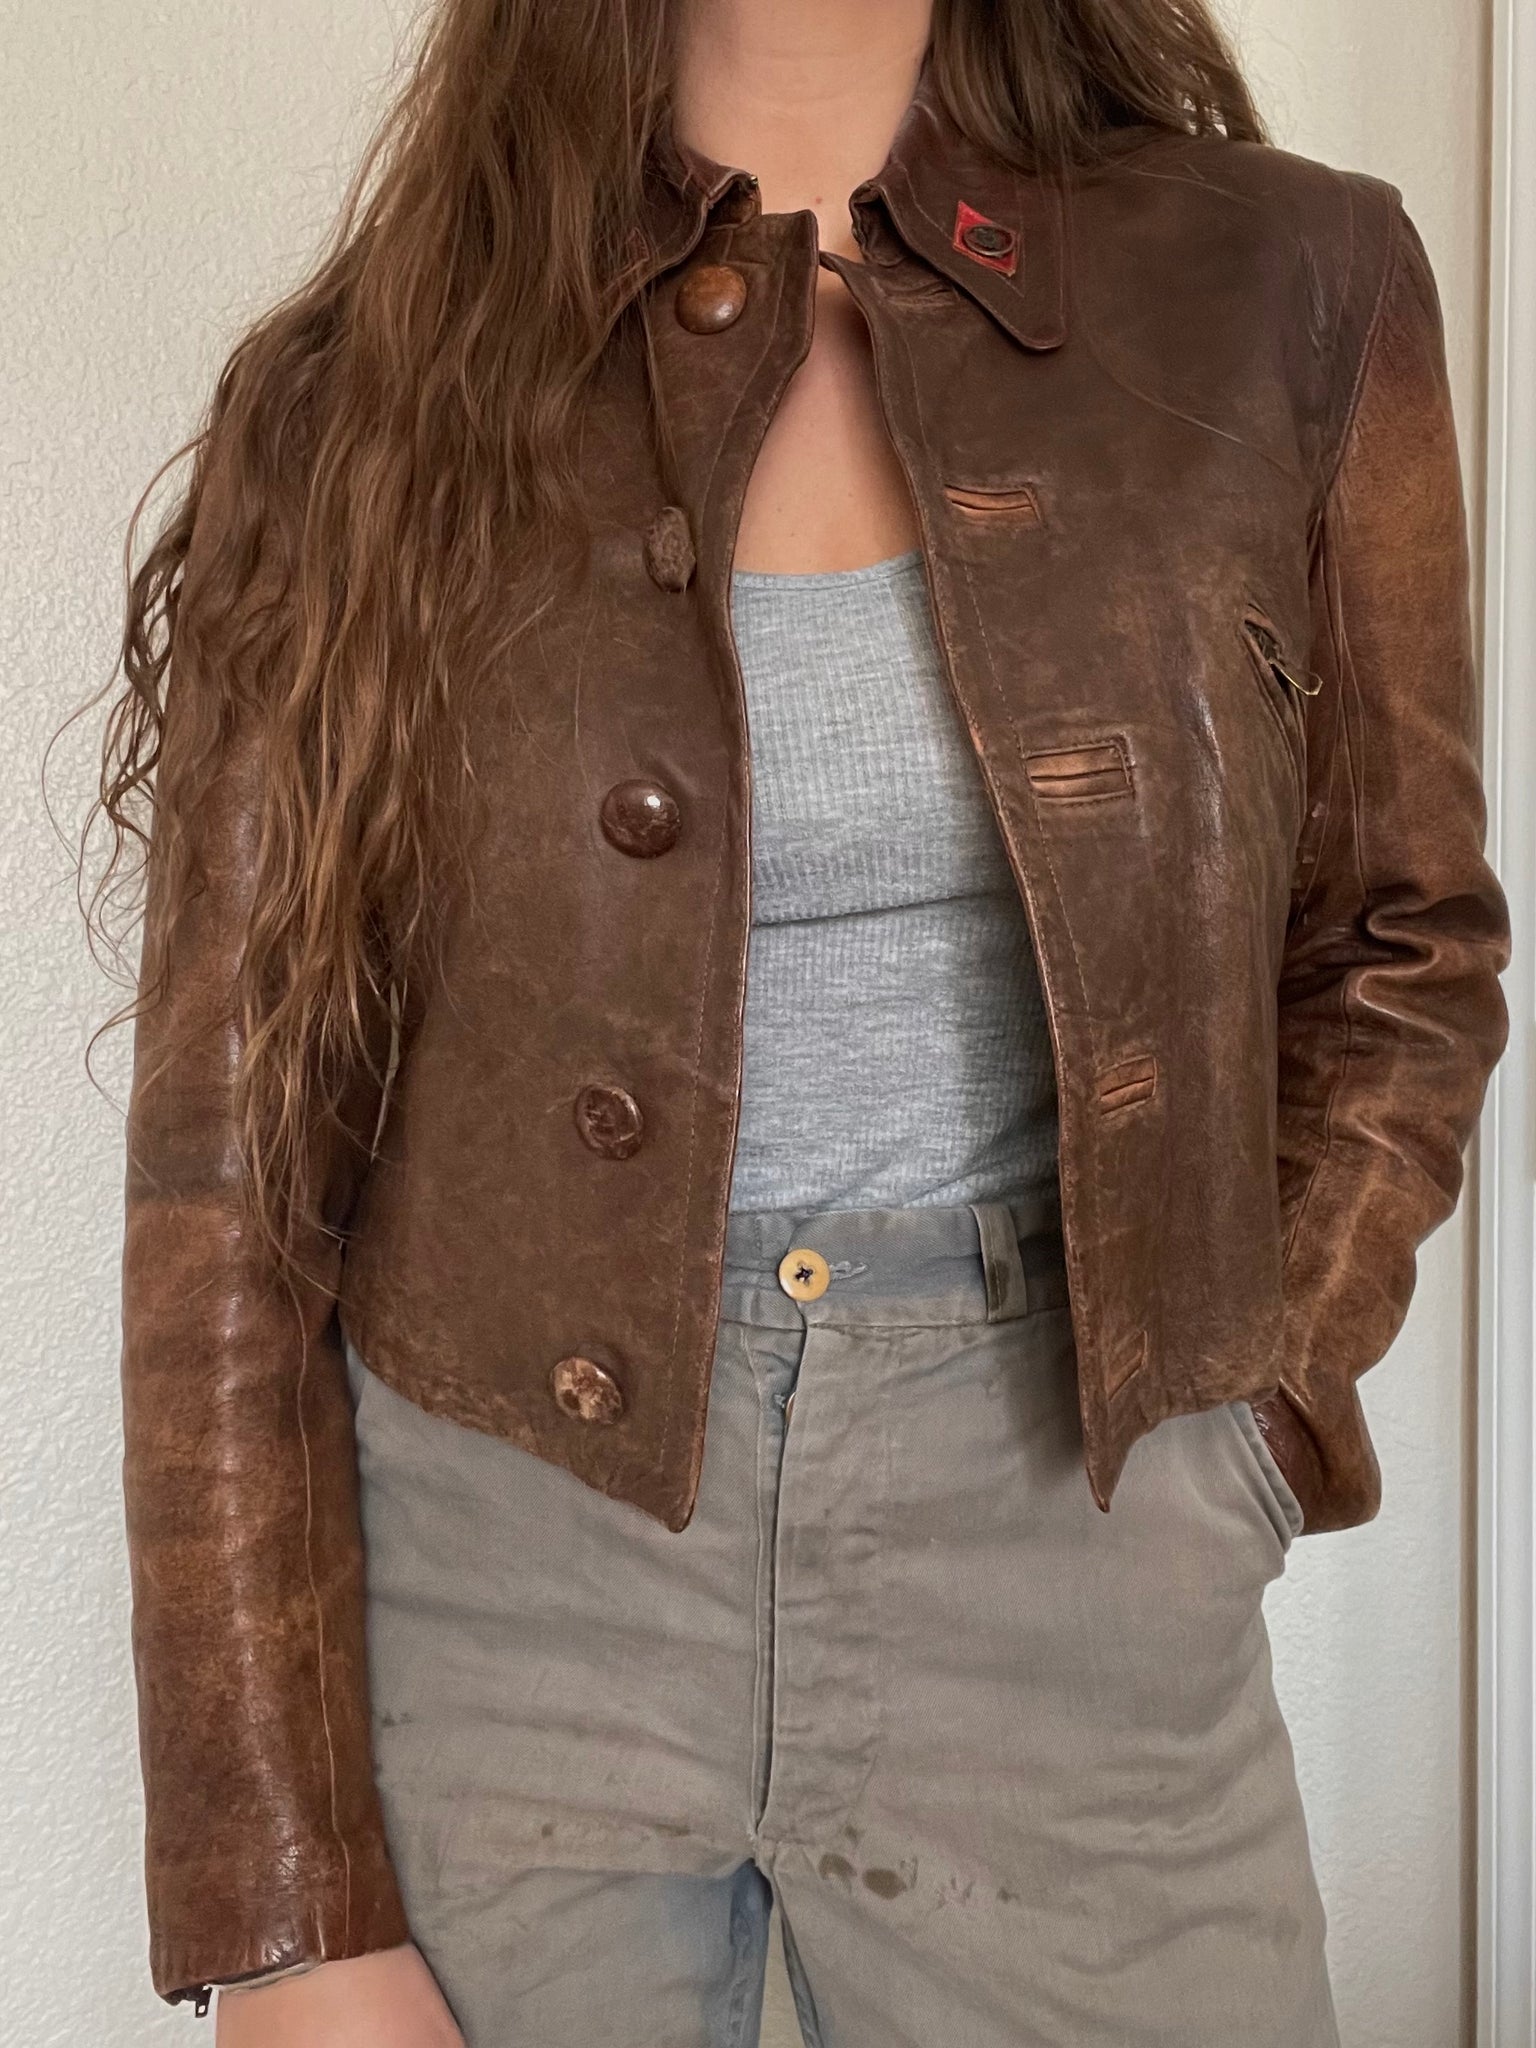 Rare 1940s Spanish Leather Side-Cinch Motorcyclist Jacket